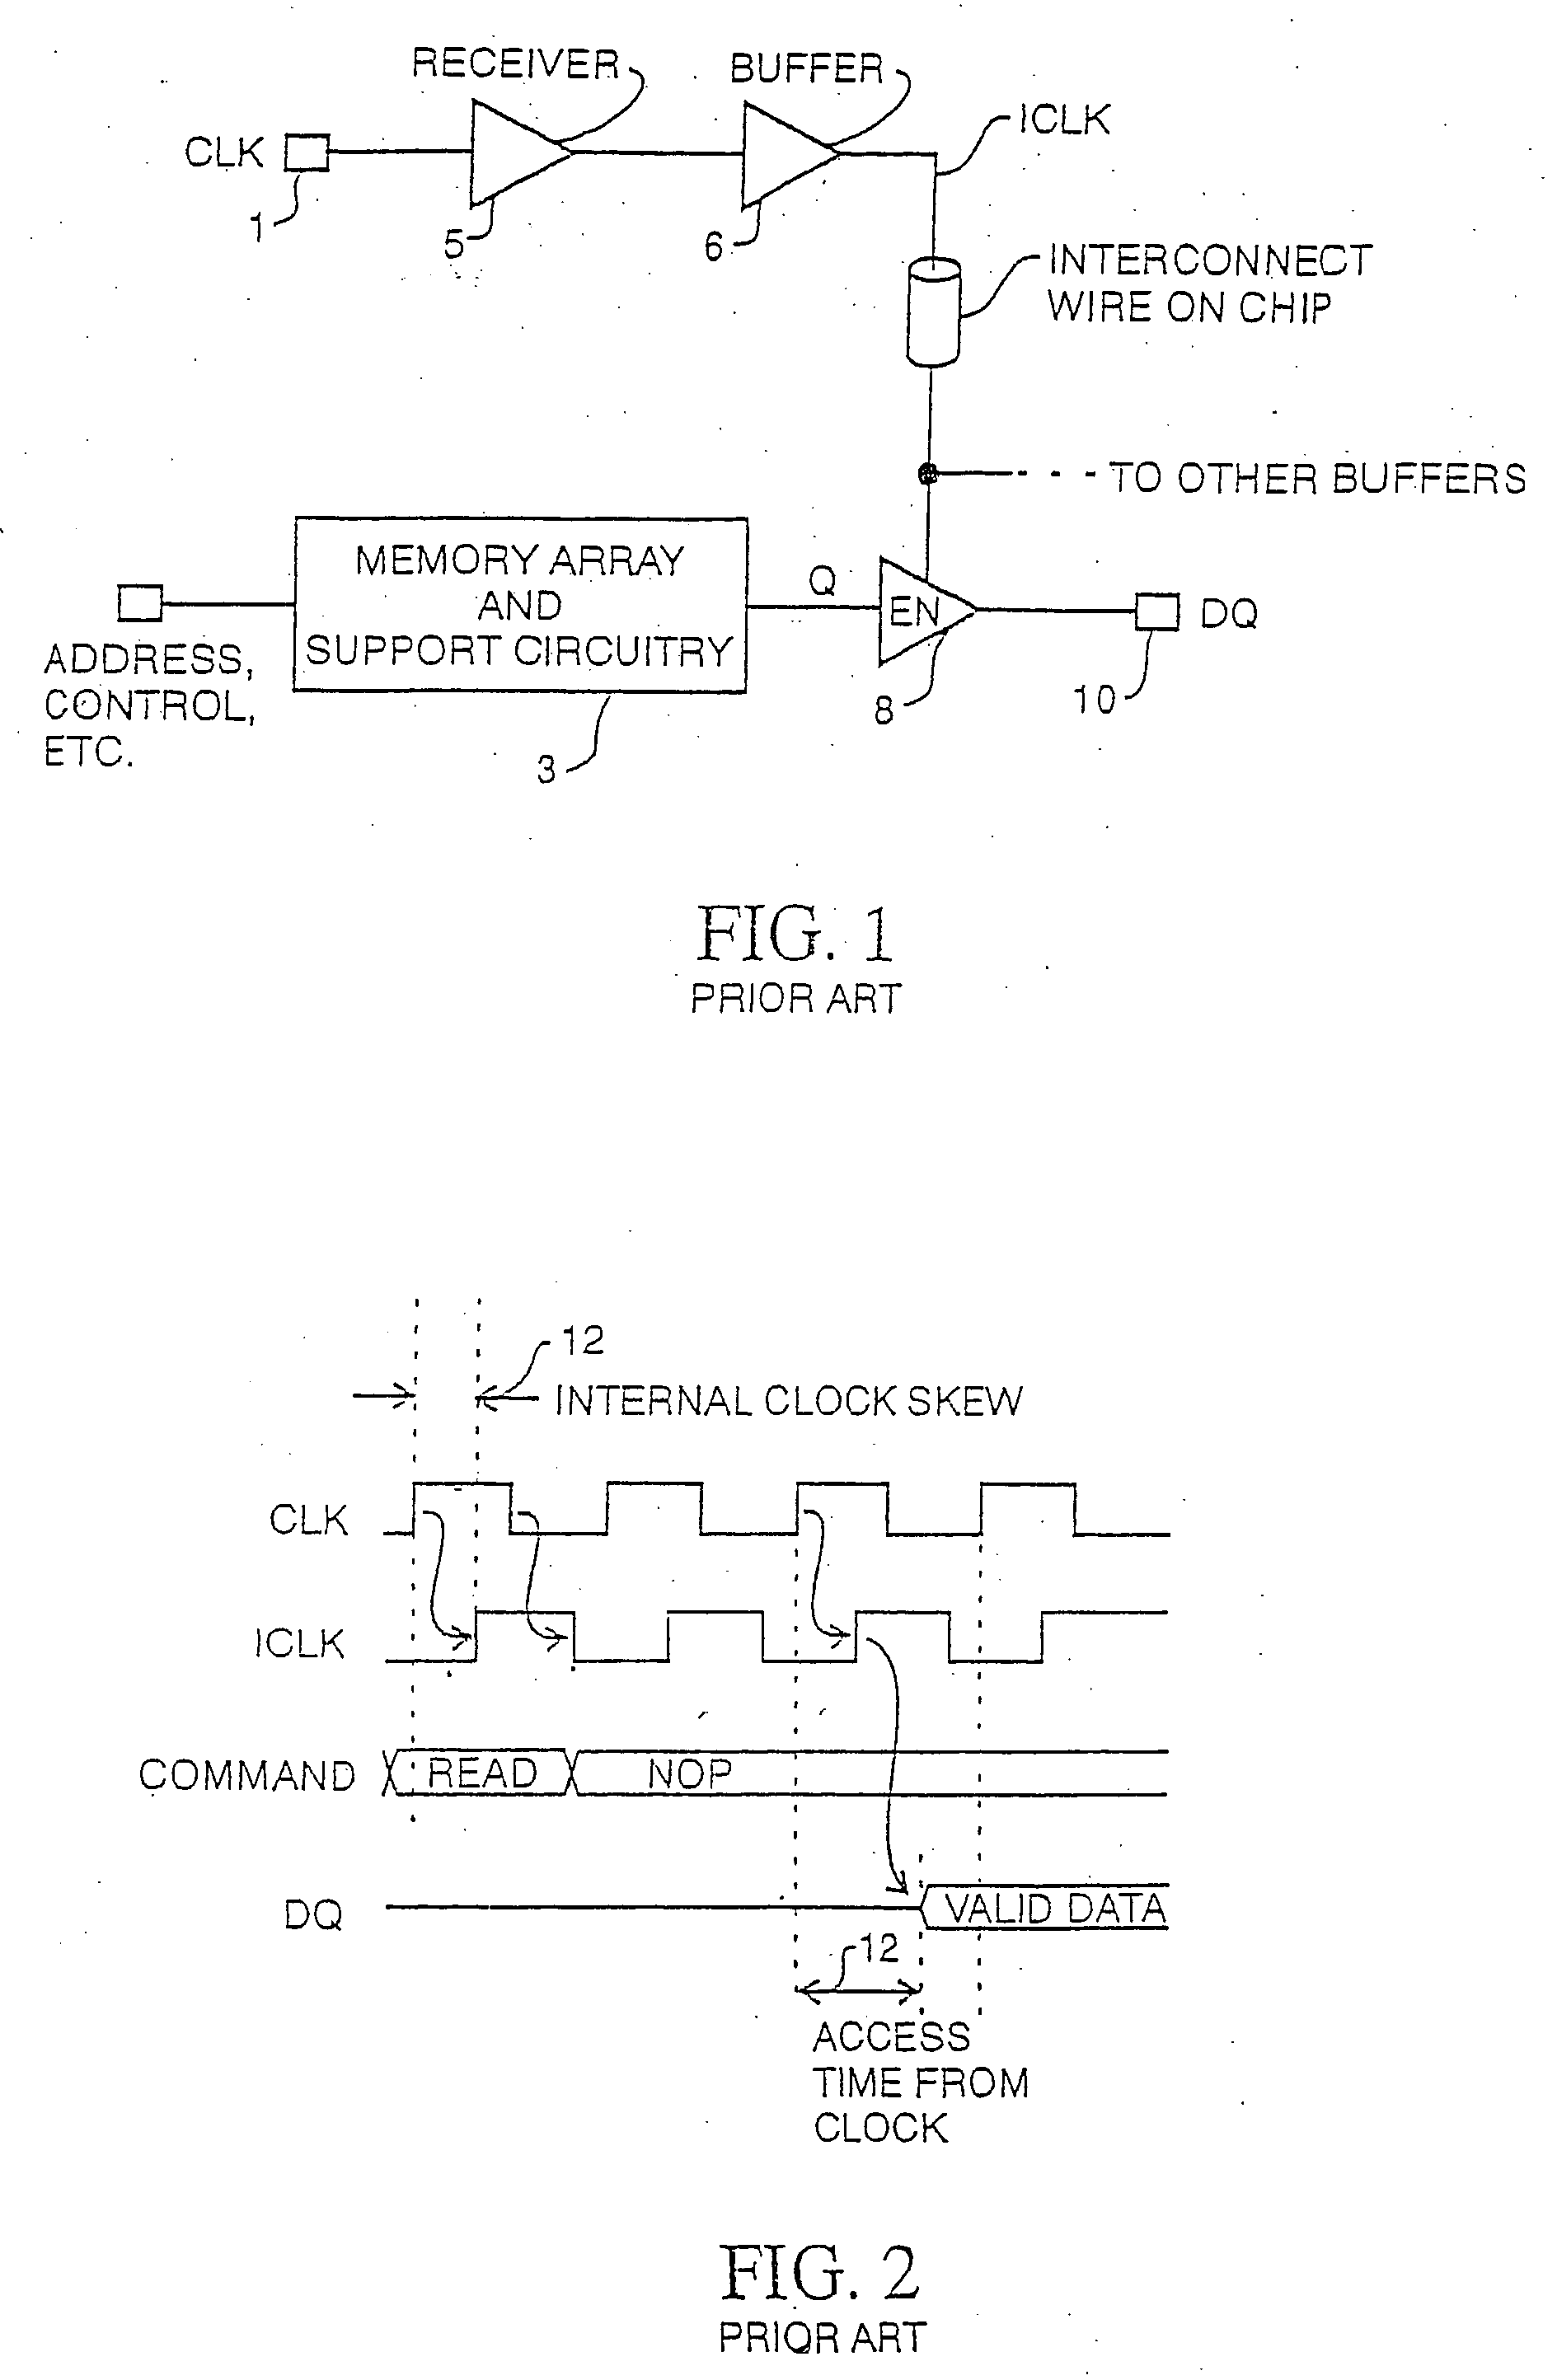 Delay locked loop implementation in a synchronous dynamic random access memory